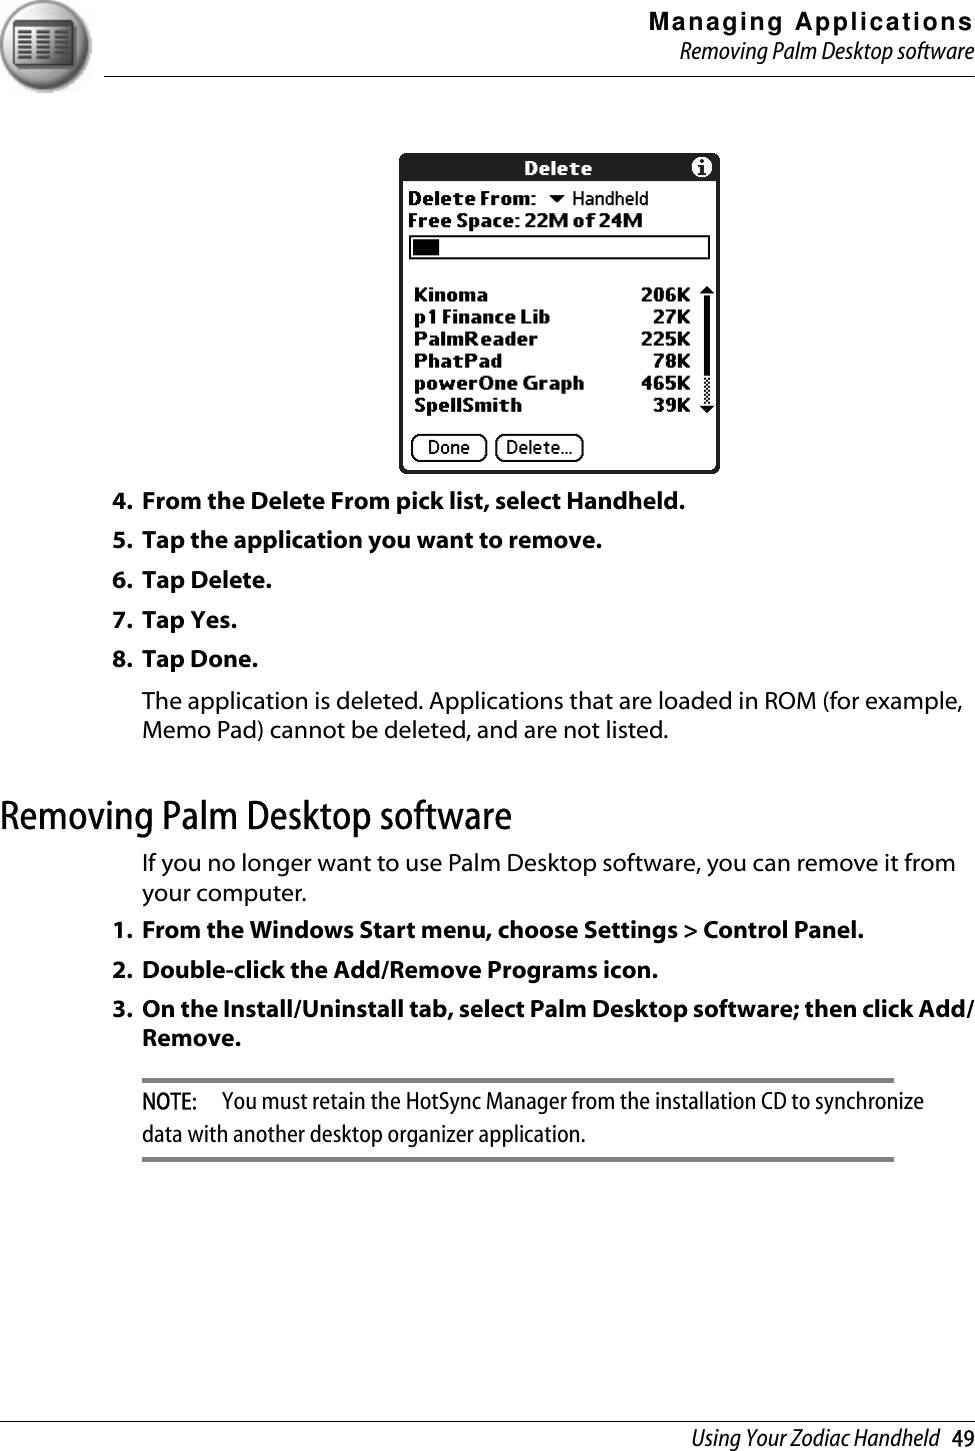 Managing ApplicationsRemoving Palm Desktop softwareUsing Your Zodiac Handheld   494. From the Delete From pick list, select Handheld.5. Tap the application you want to remove. 6. Tap Delete.7. Tap Yes.8. Tap Done.The application is deleted. Applications that are loaded in ROM (for example, Memo Pad) cannot be deleted, and are not listed.Removing Palm Desktop softwareIf you no longer want to use Palm Desktop software, you can remove it from your computer. 1. From the Windows Start menu, choose Settings &gt; Control Panel.2. Double-click the Add/Remove Programs icon. 3. On the Install/Uninstall tab, select Palm Desktop software; then click Add/Remove.NOTE:  You must retain the HotSync Manager from the installation CD to synchronize data with another desktop organizer application.